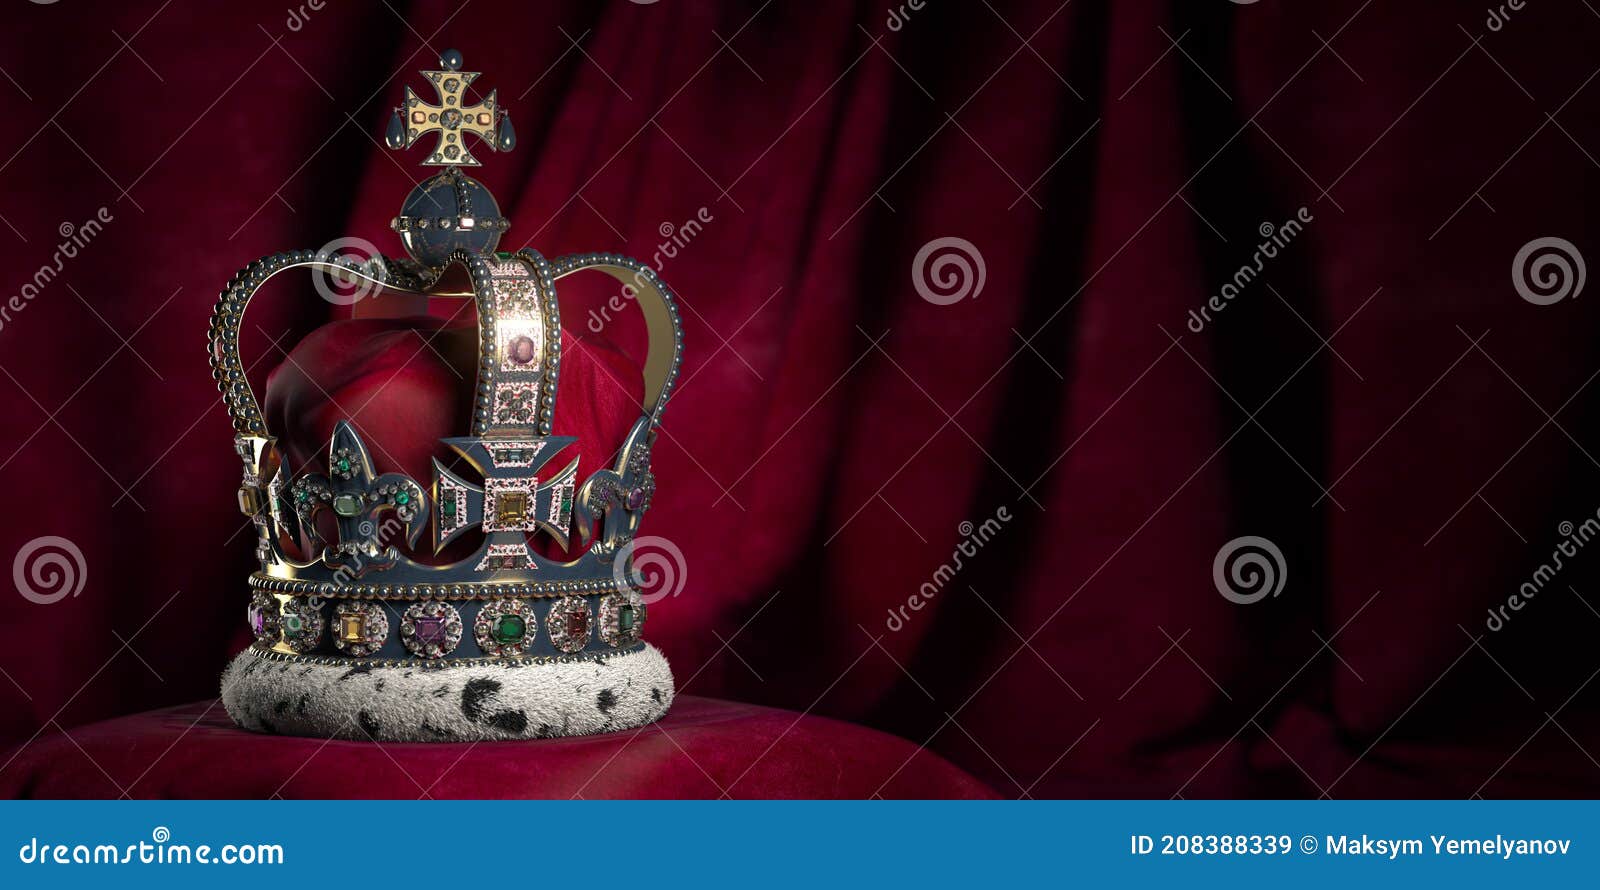 royal golden crown with jewels on pillow on pink red background. s of uk united kingdom monarchy